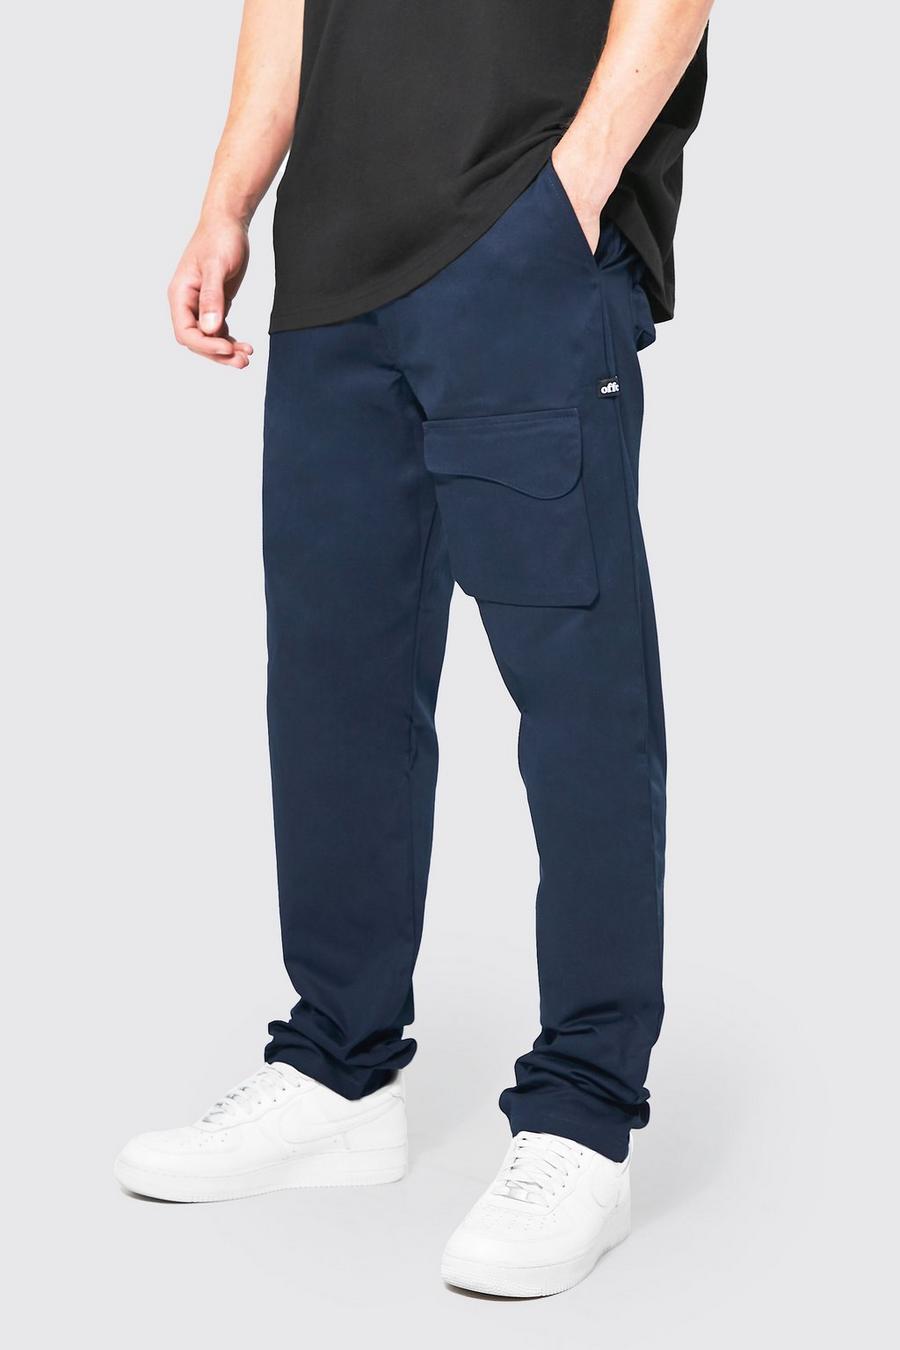 Navy Tall Relaxed Fit Curved Pocket Trouser